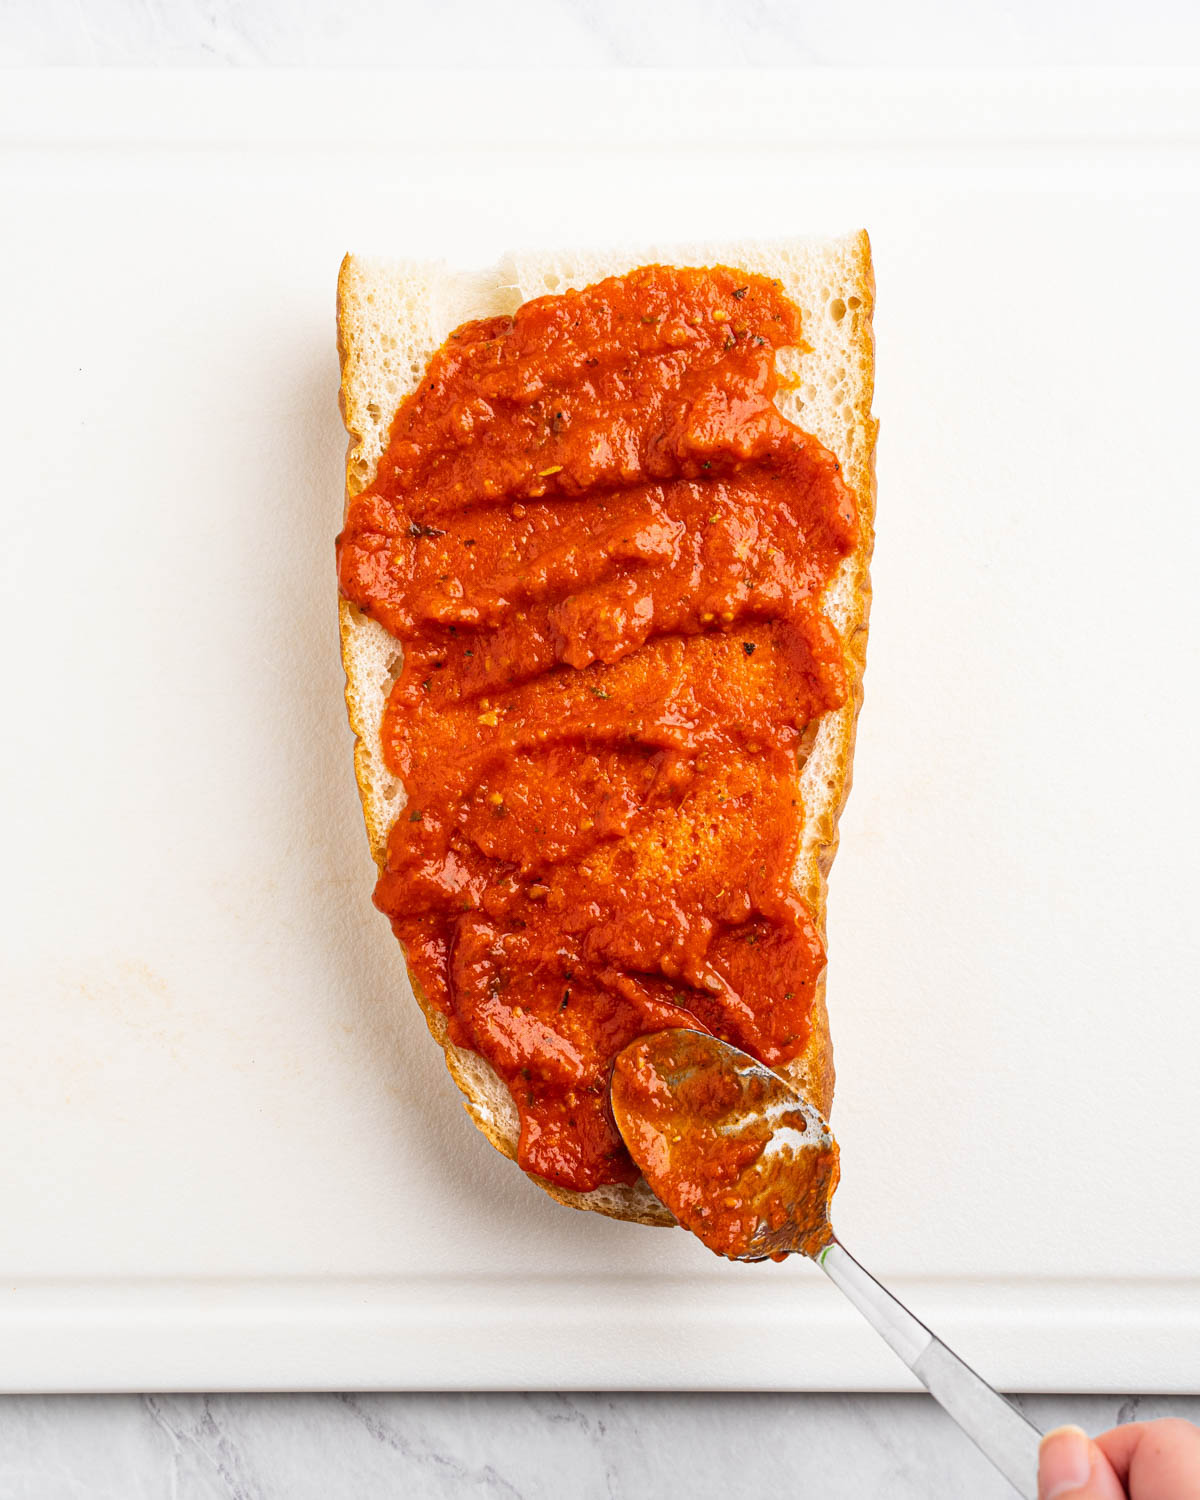 Pizza sauce is being spread on a half slice of french bread. A spoon is visible at the bottom of the image. 